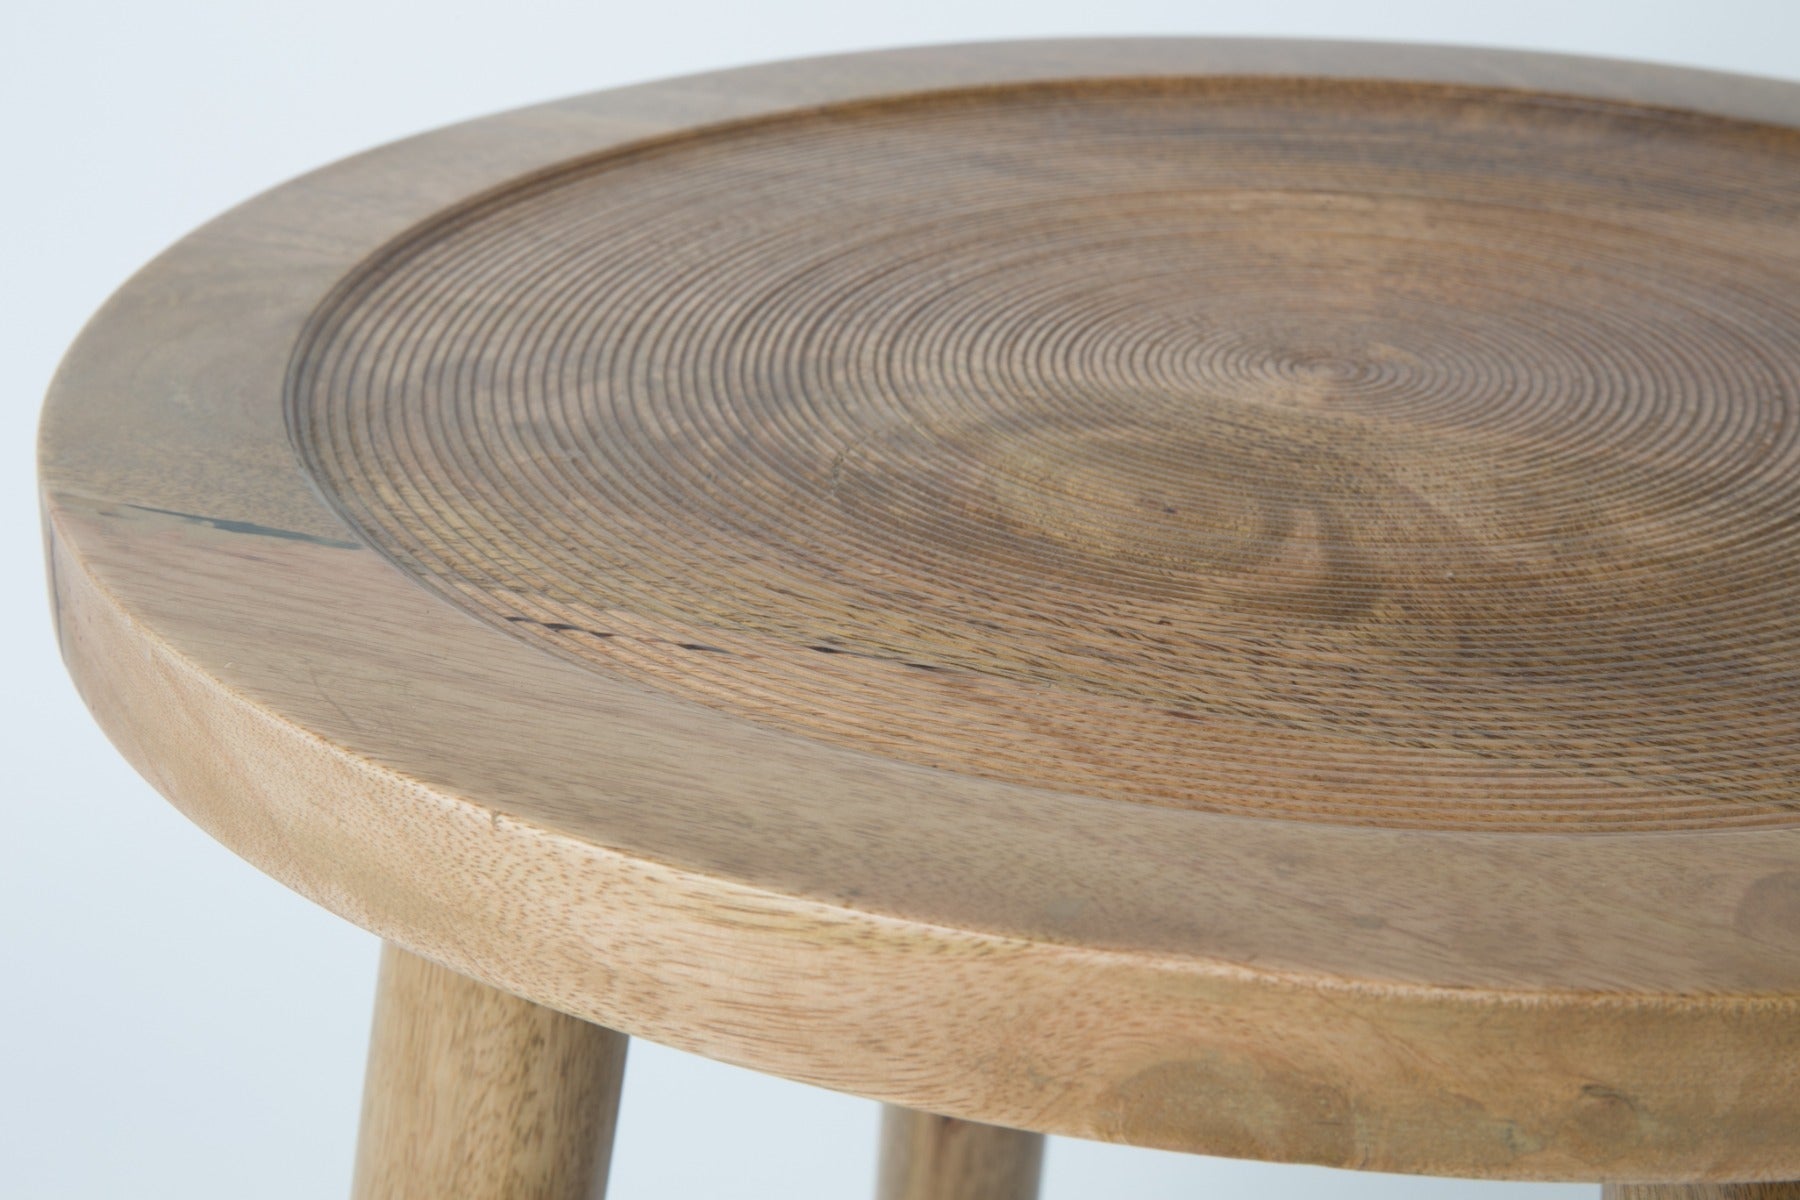 DENDRON S wooden table